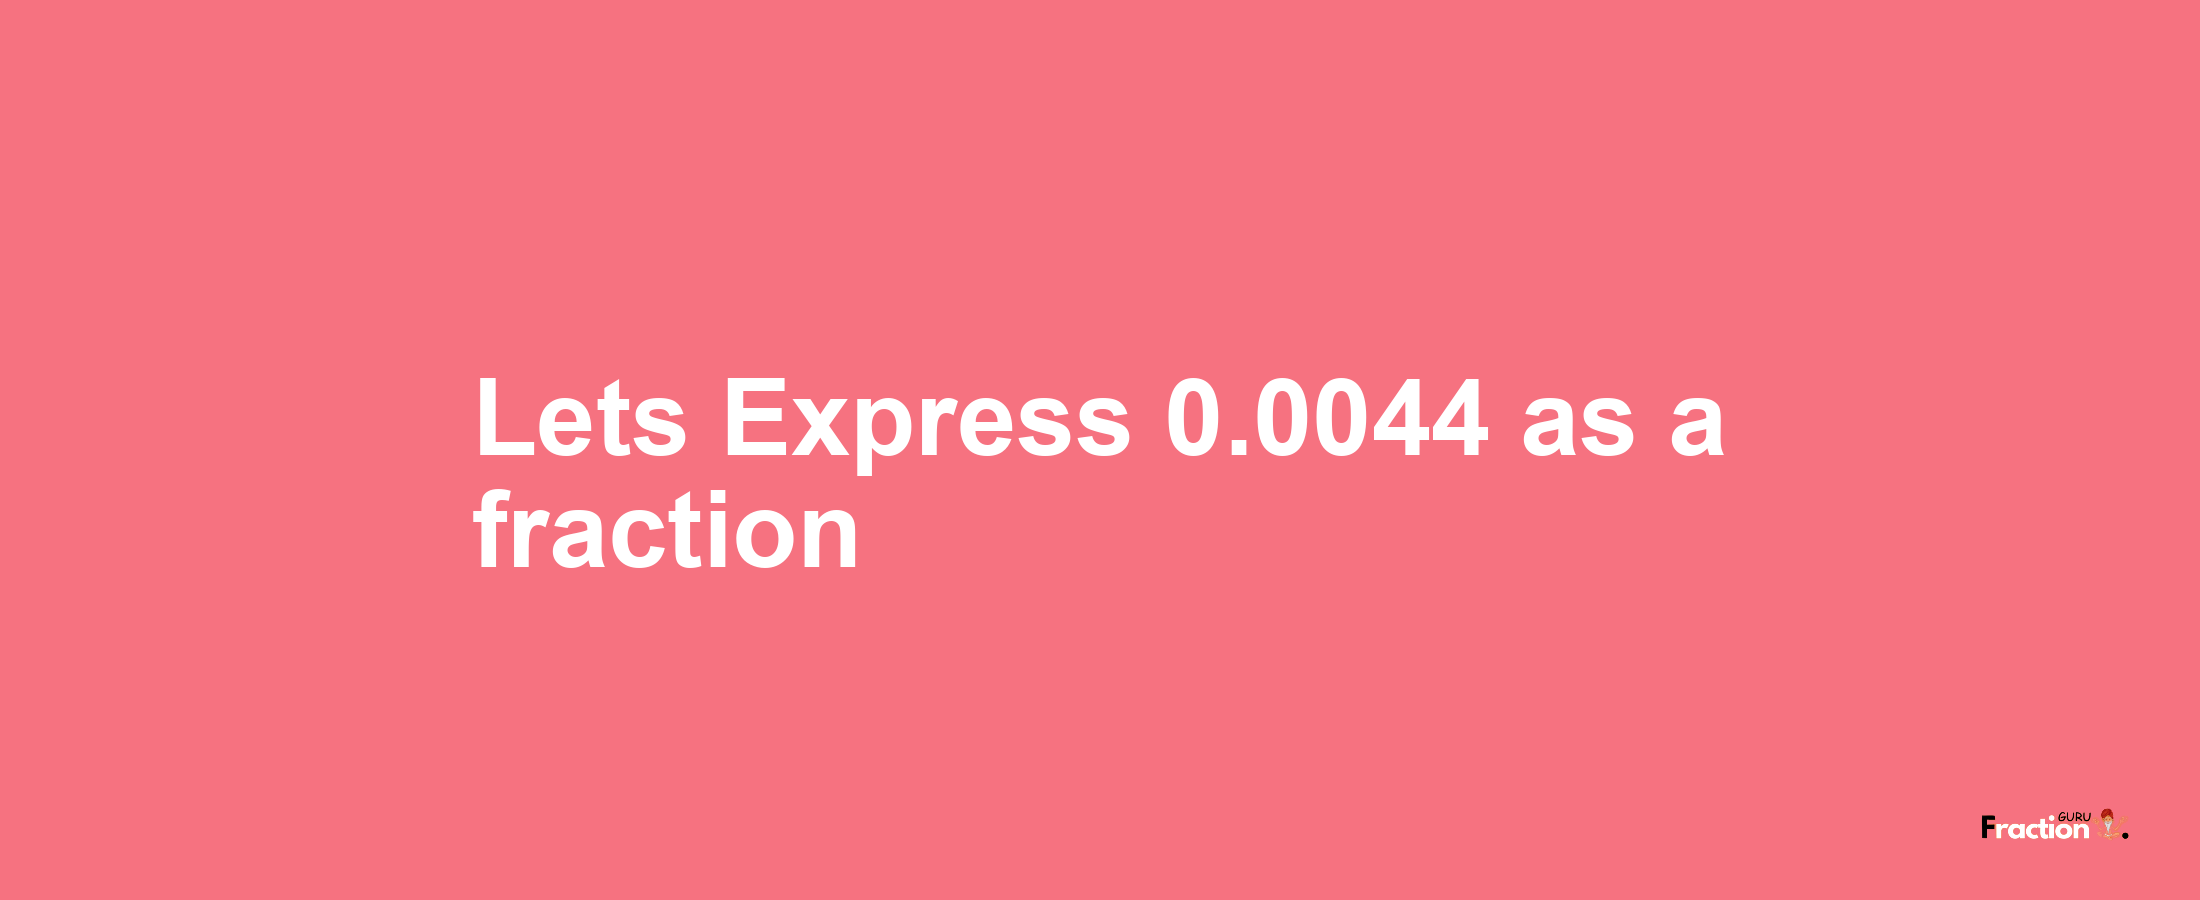 Lets Express 0.0044 as afraction